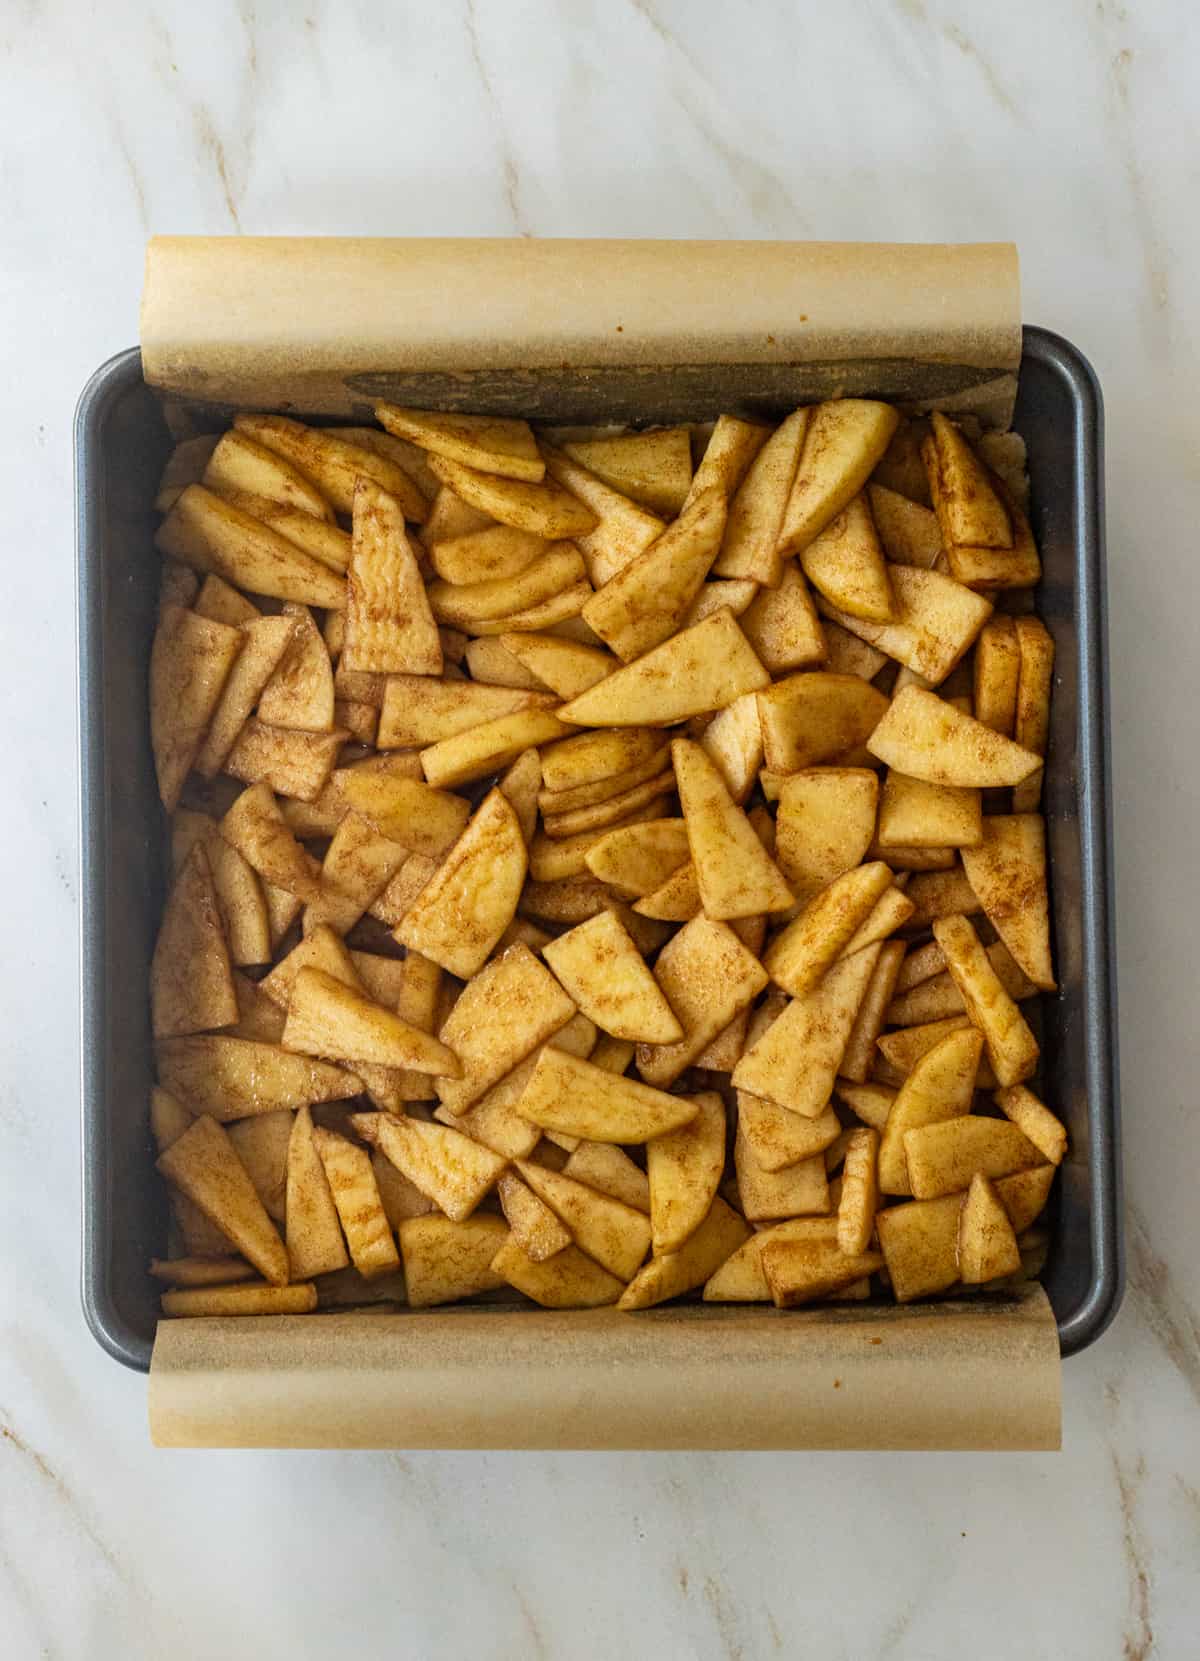 Cinnamon apple slices in a parchment lined baking dish.